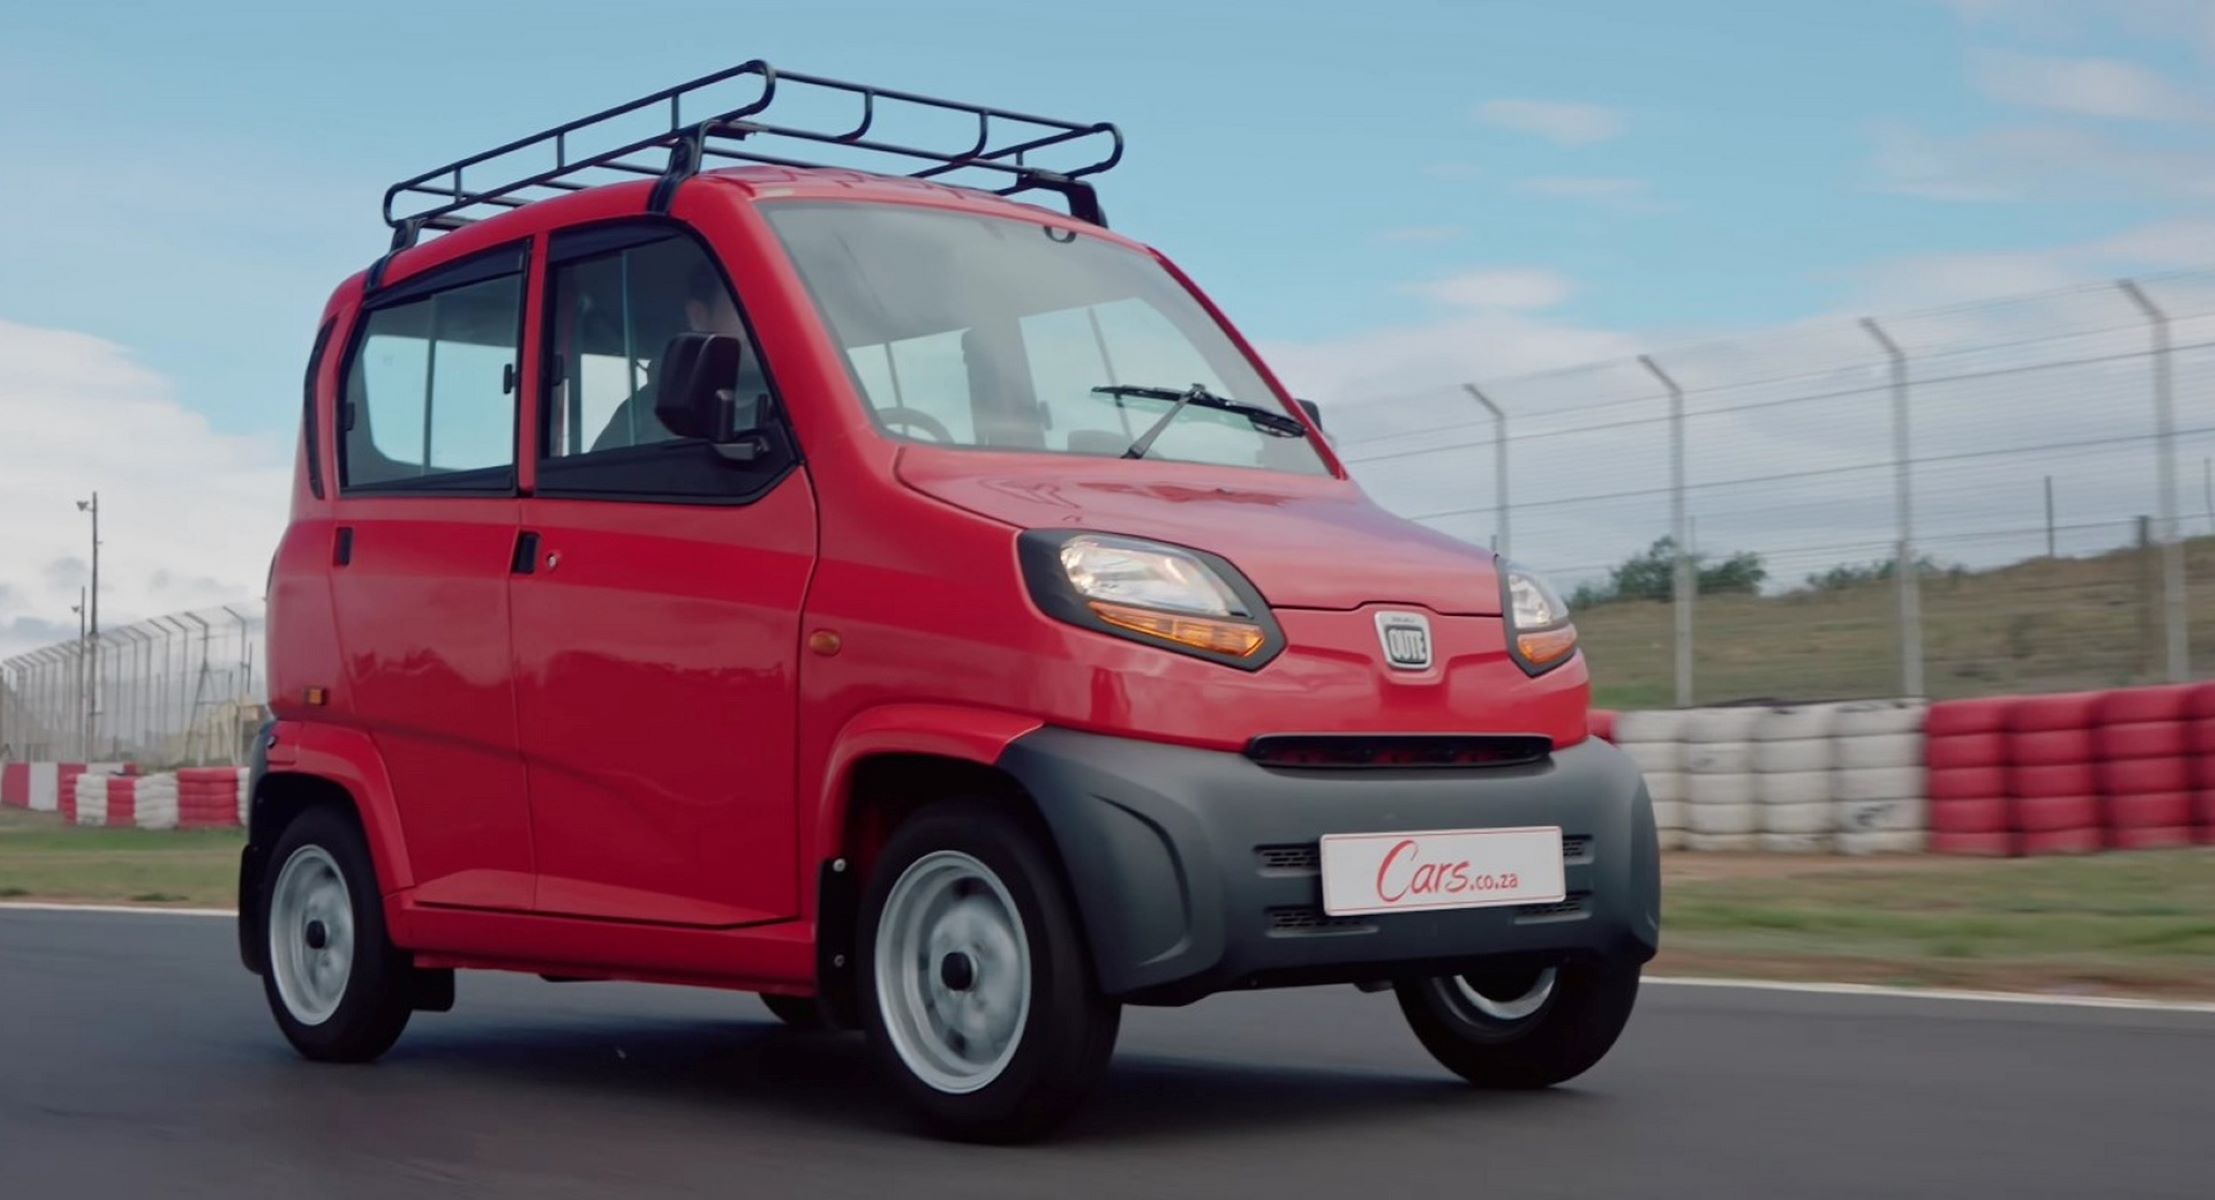 The World’s Cheapest Car Revealed – You Won’t Believe The Price!